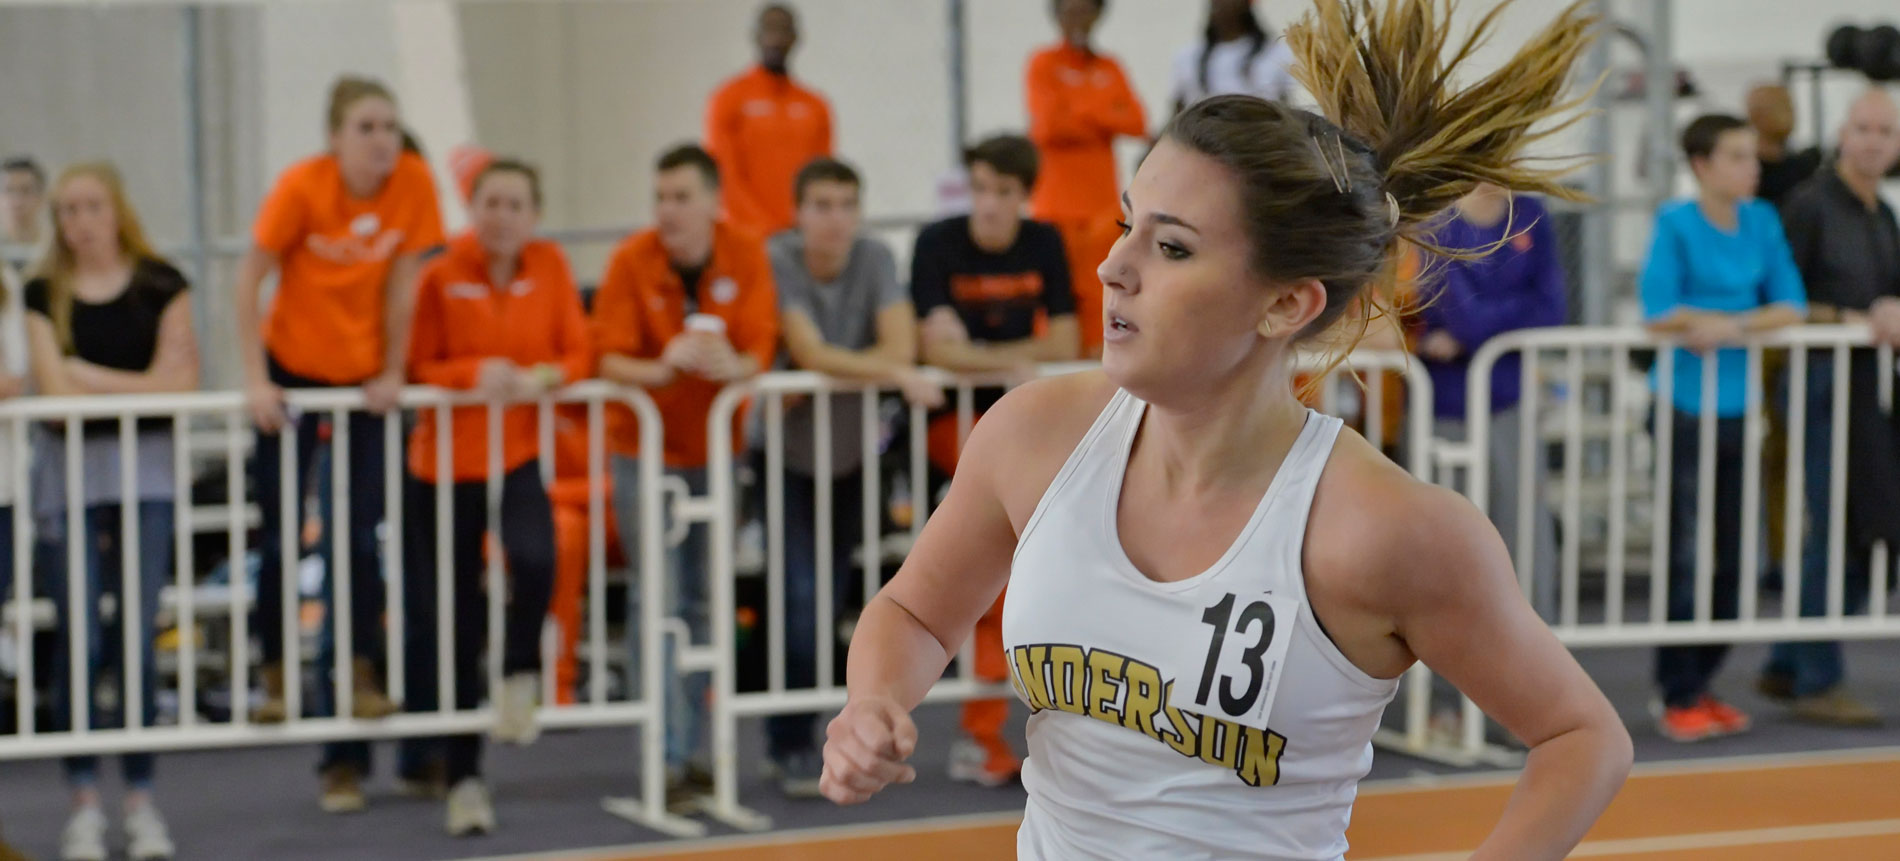 Love Finishes Seventh in 1500 Meter Run at Appalachian State